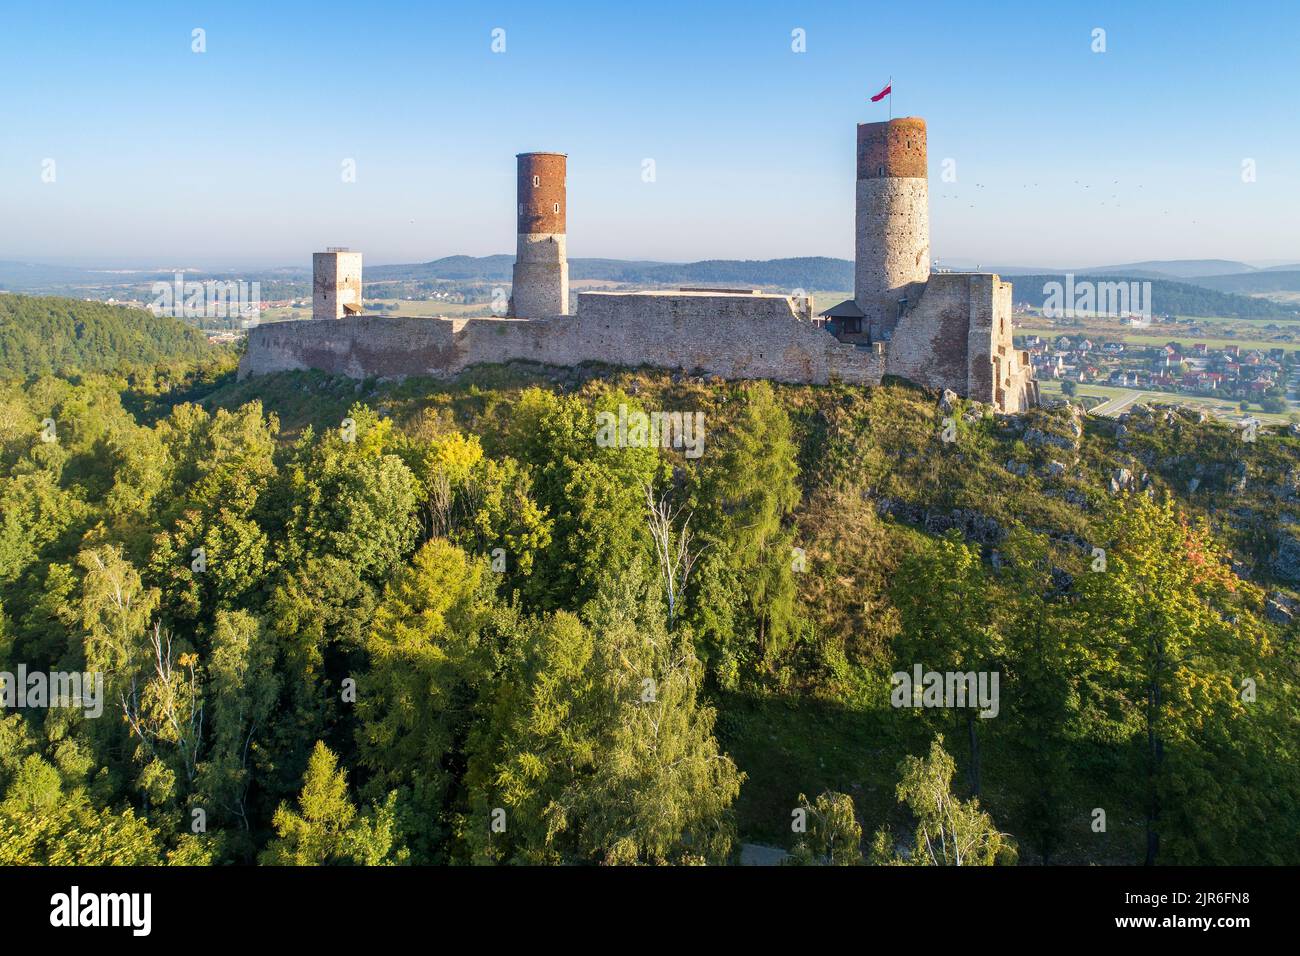 Medieval royal castle in Chęciny near Kielce in Poland. Built in late 13th century. Ruin partly renovated. Aerial view in sunrise light Stock Photo